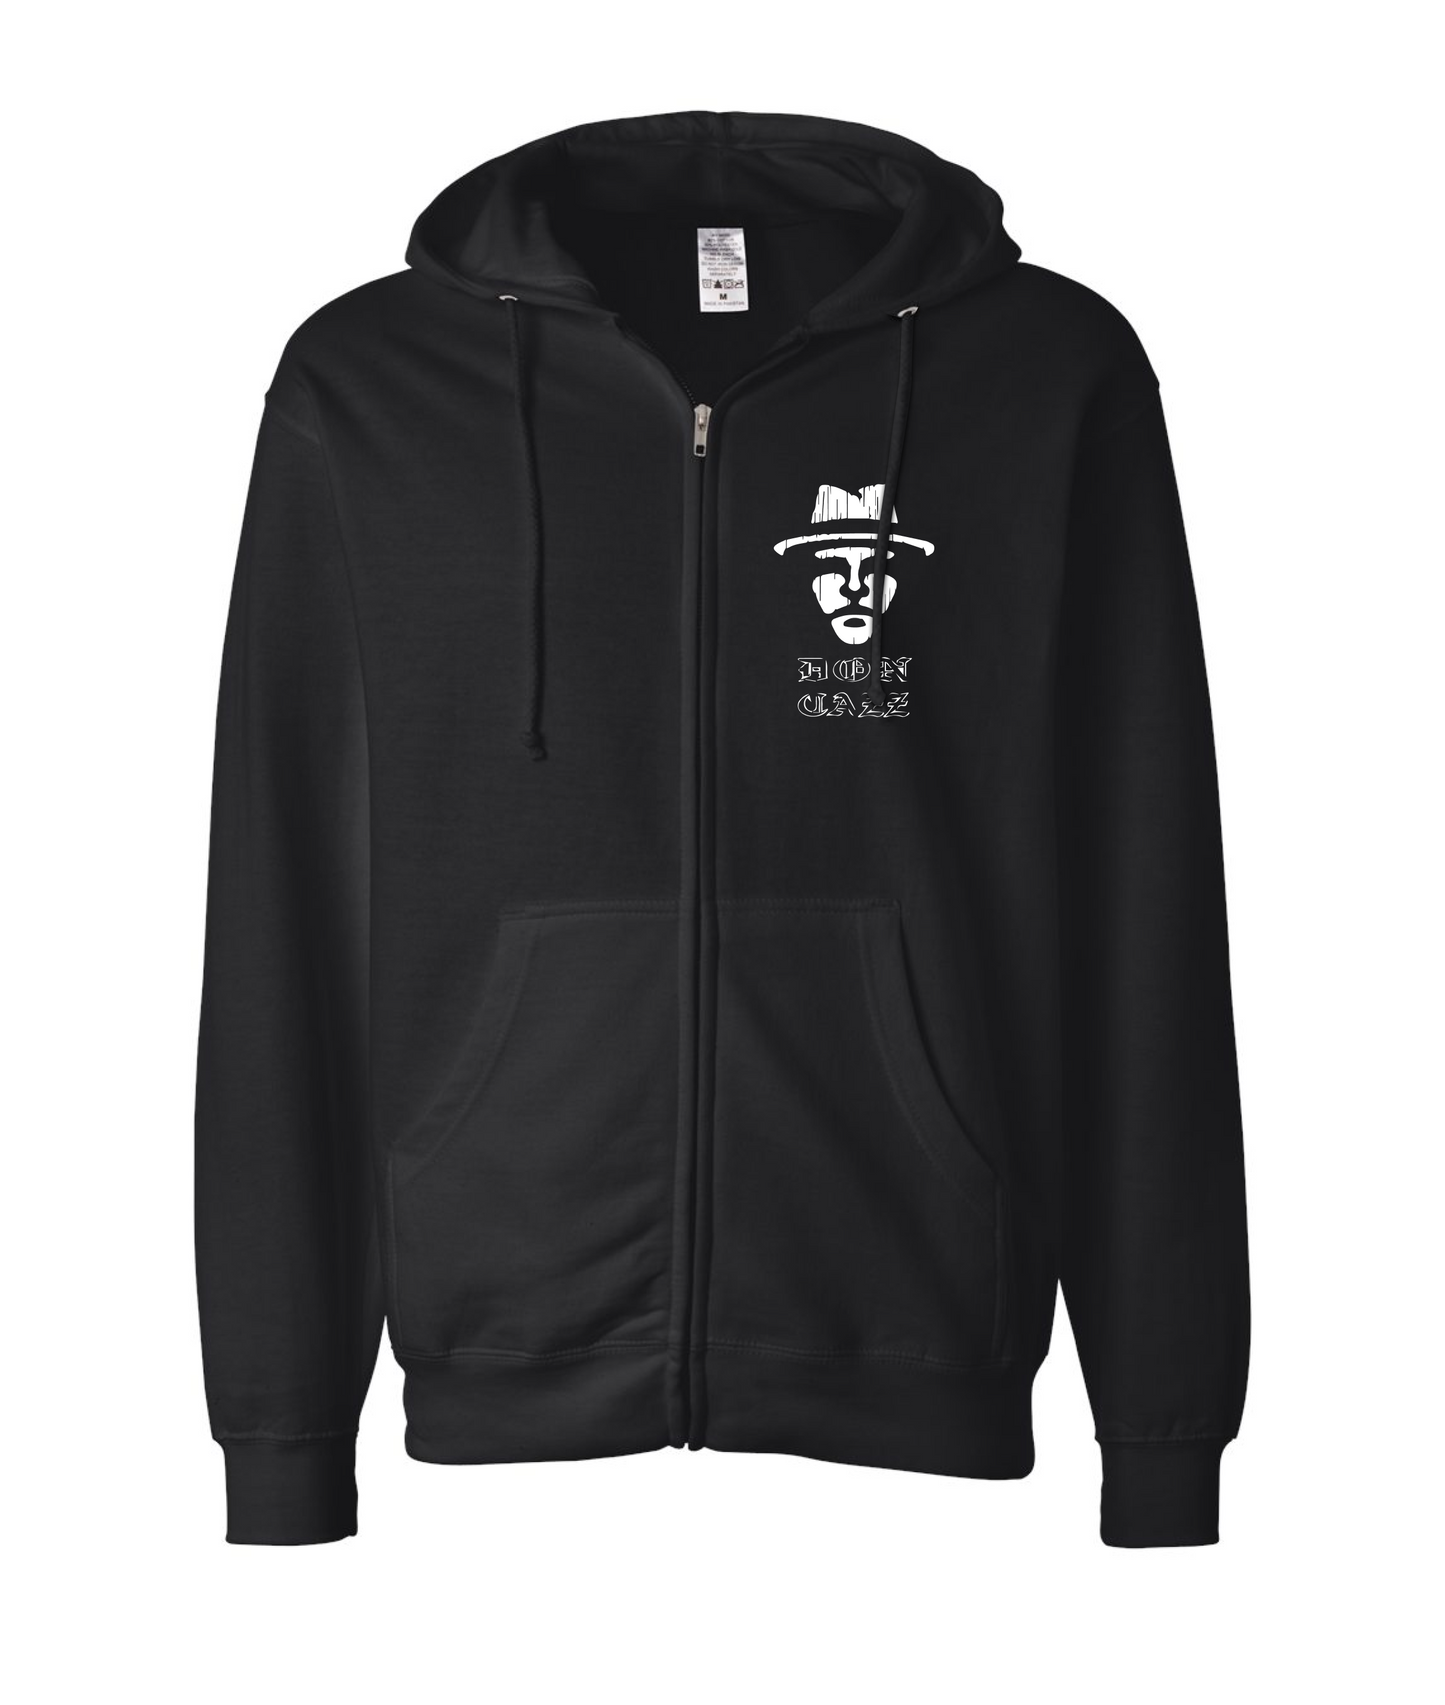 Don Cazz - The Don - Black Zip Up Hoodie